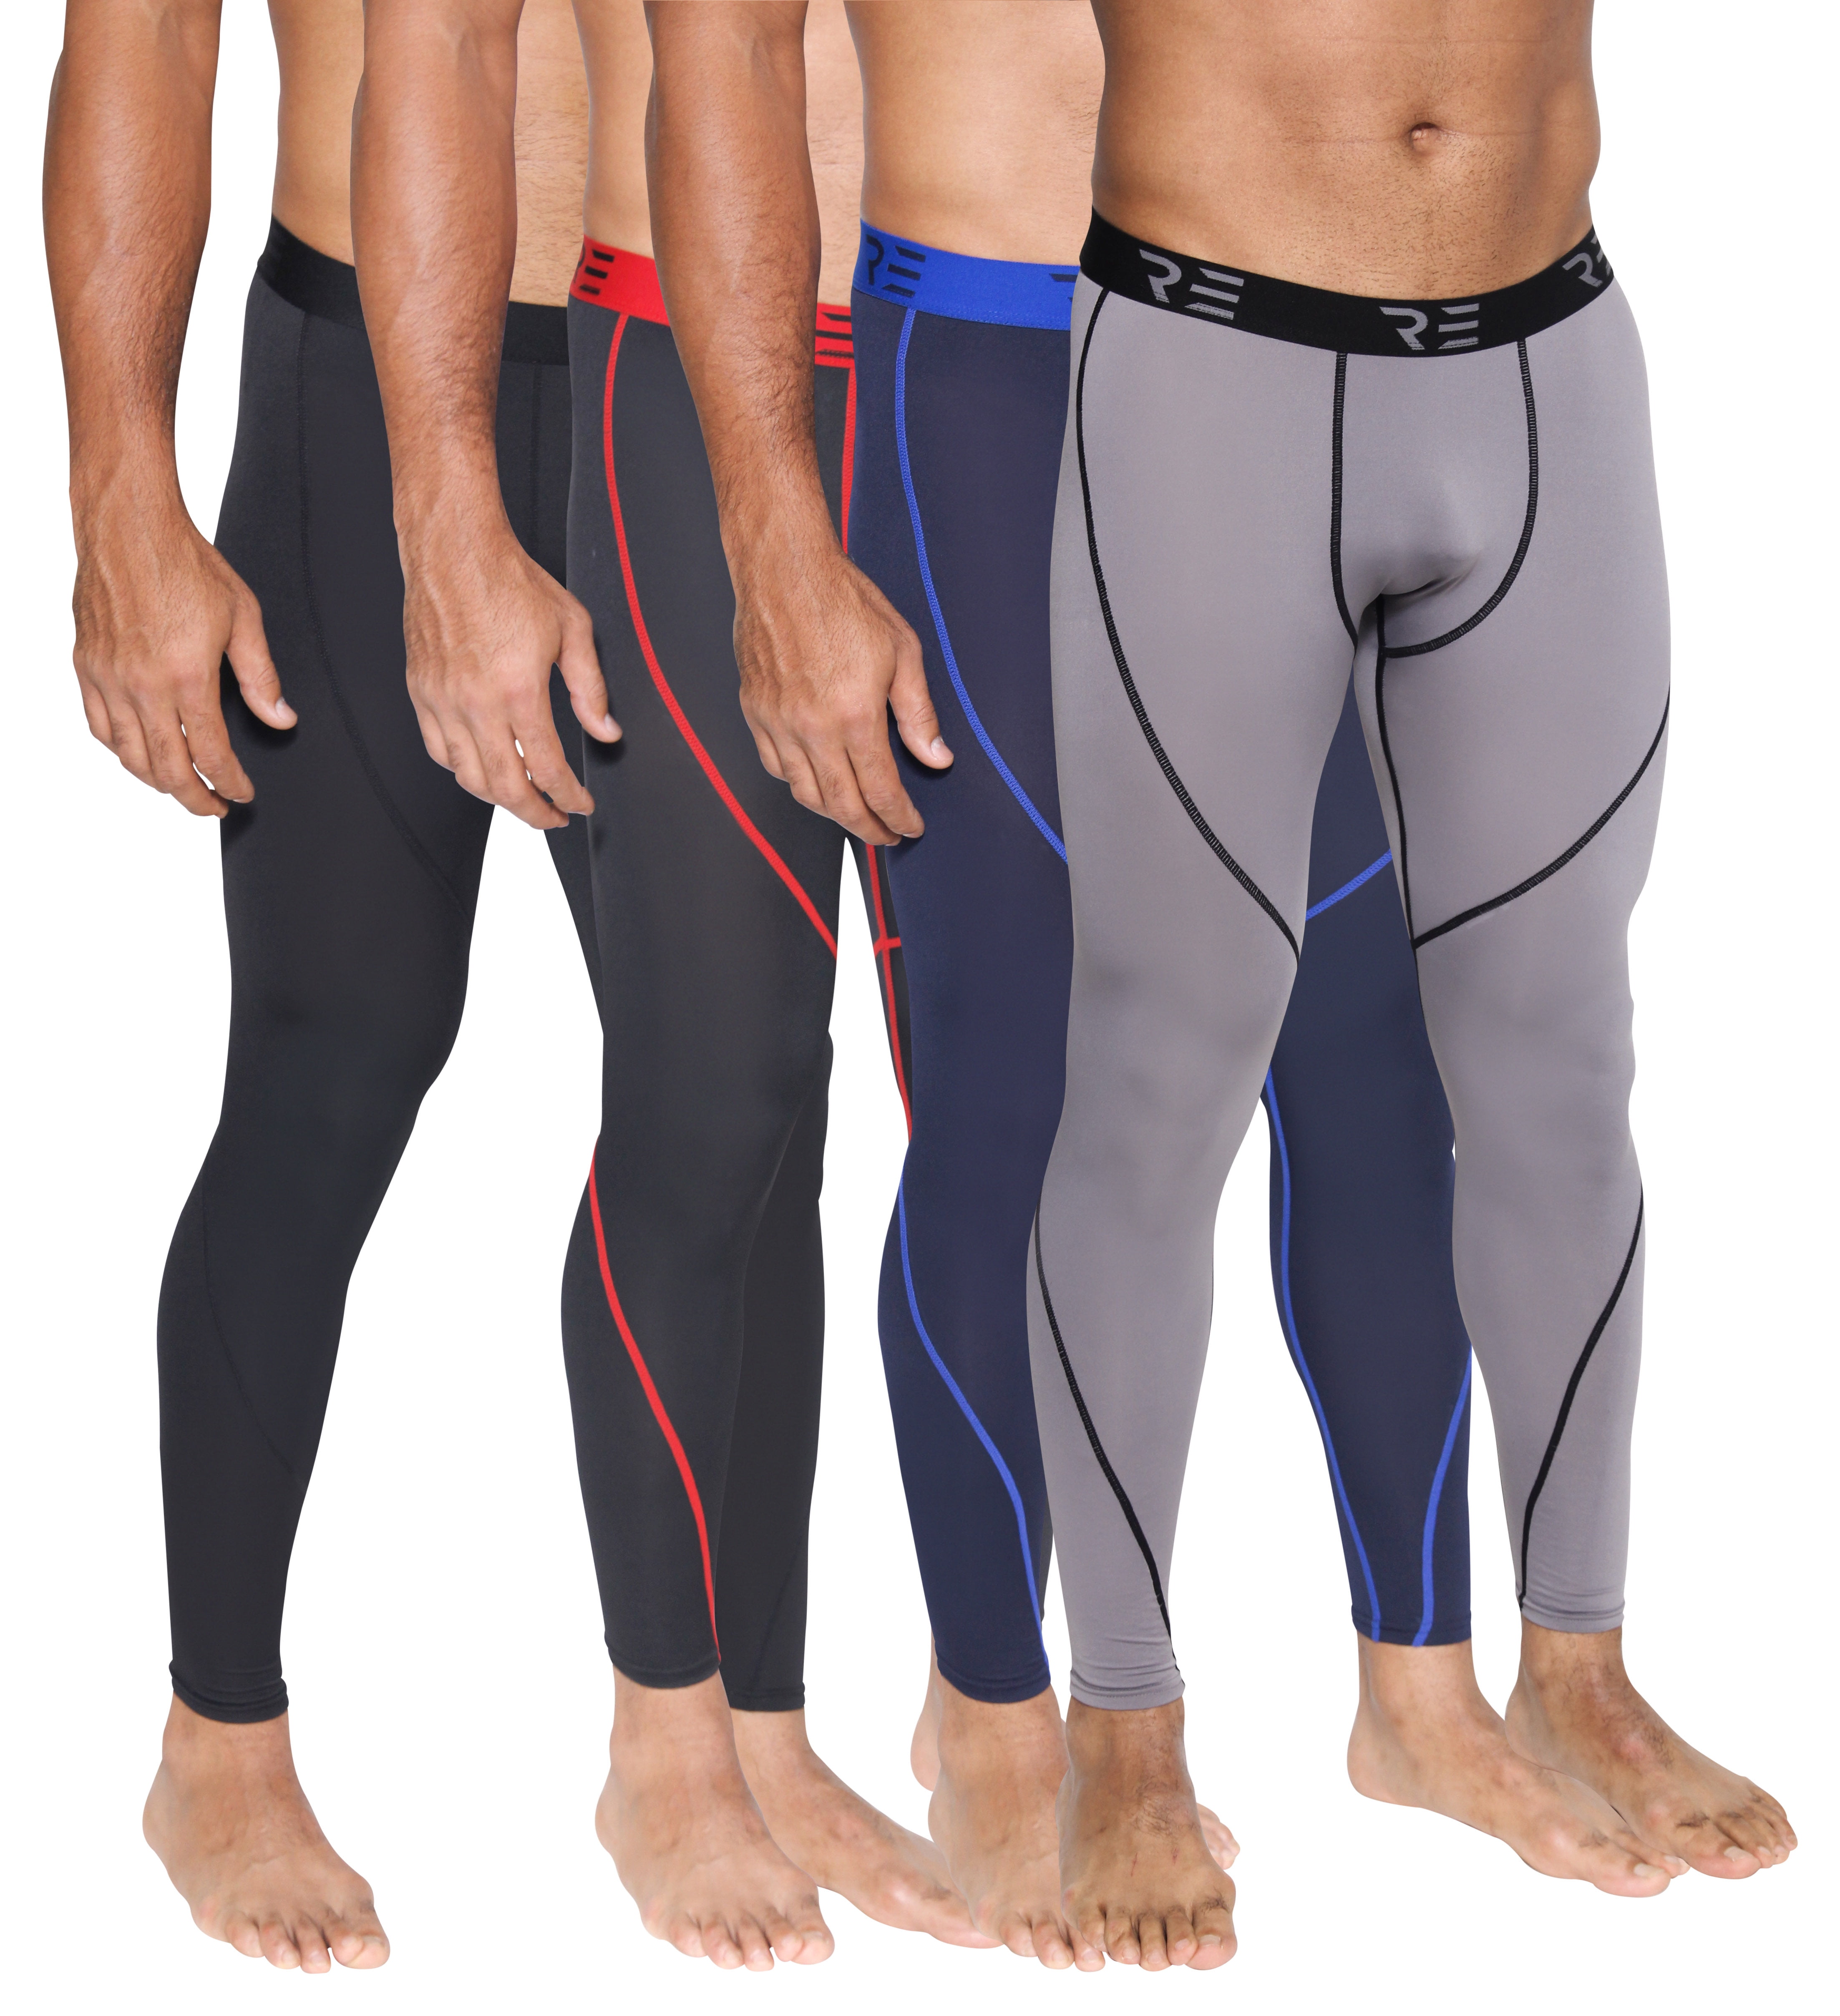 Men's Compression Tights Pants Shirts Athletic Skin Base Layers Cool Dry Wicking 